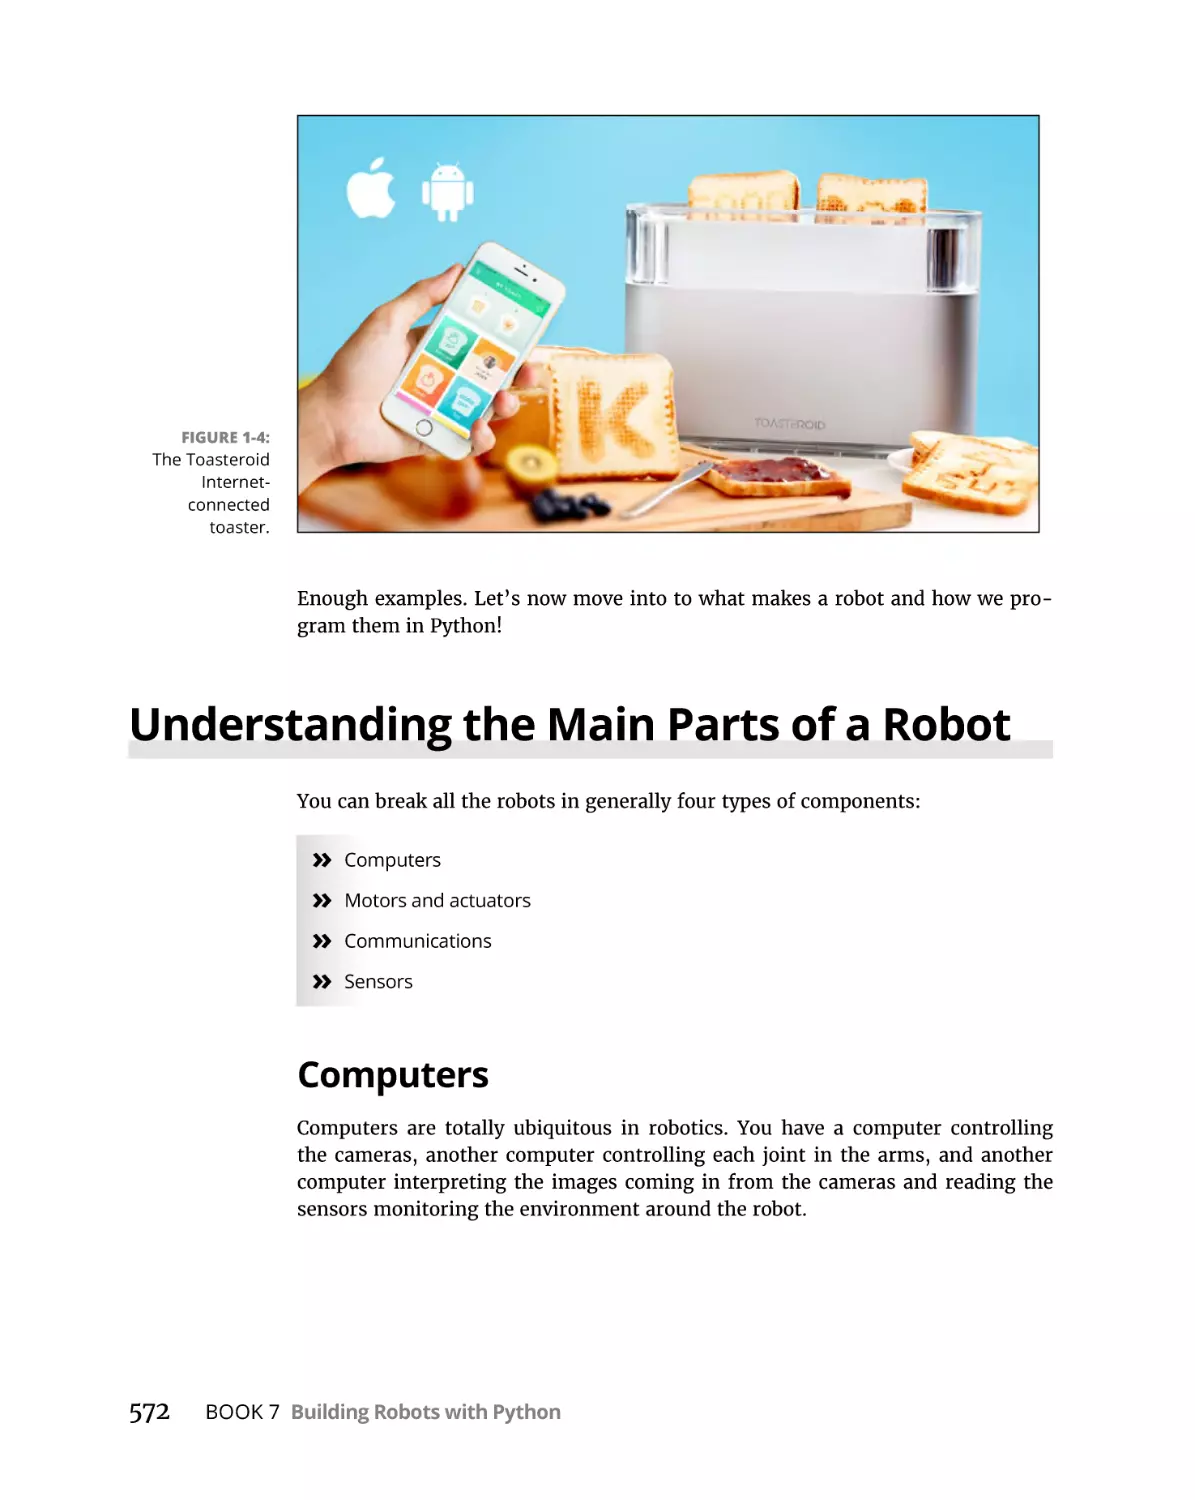 Understanding the Main Parts of a Robot
Computers